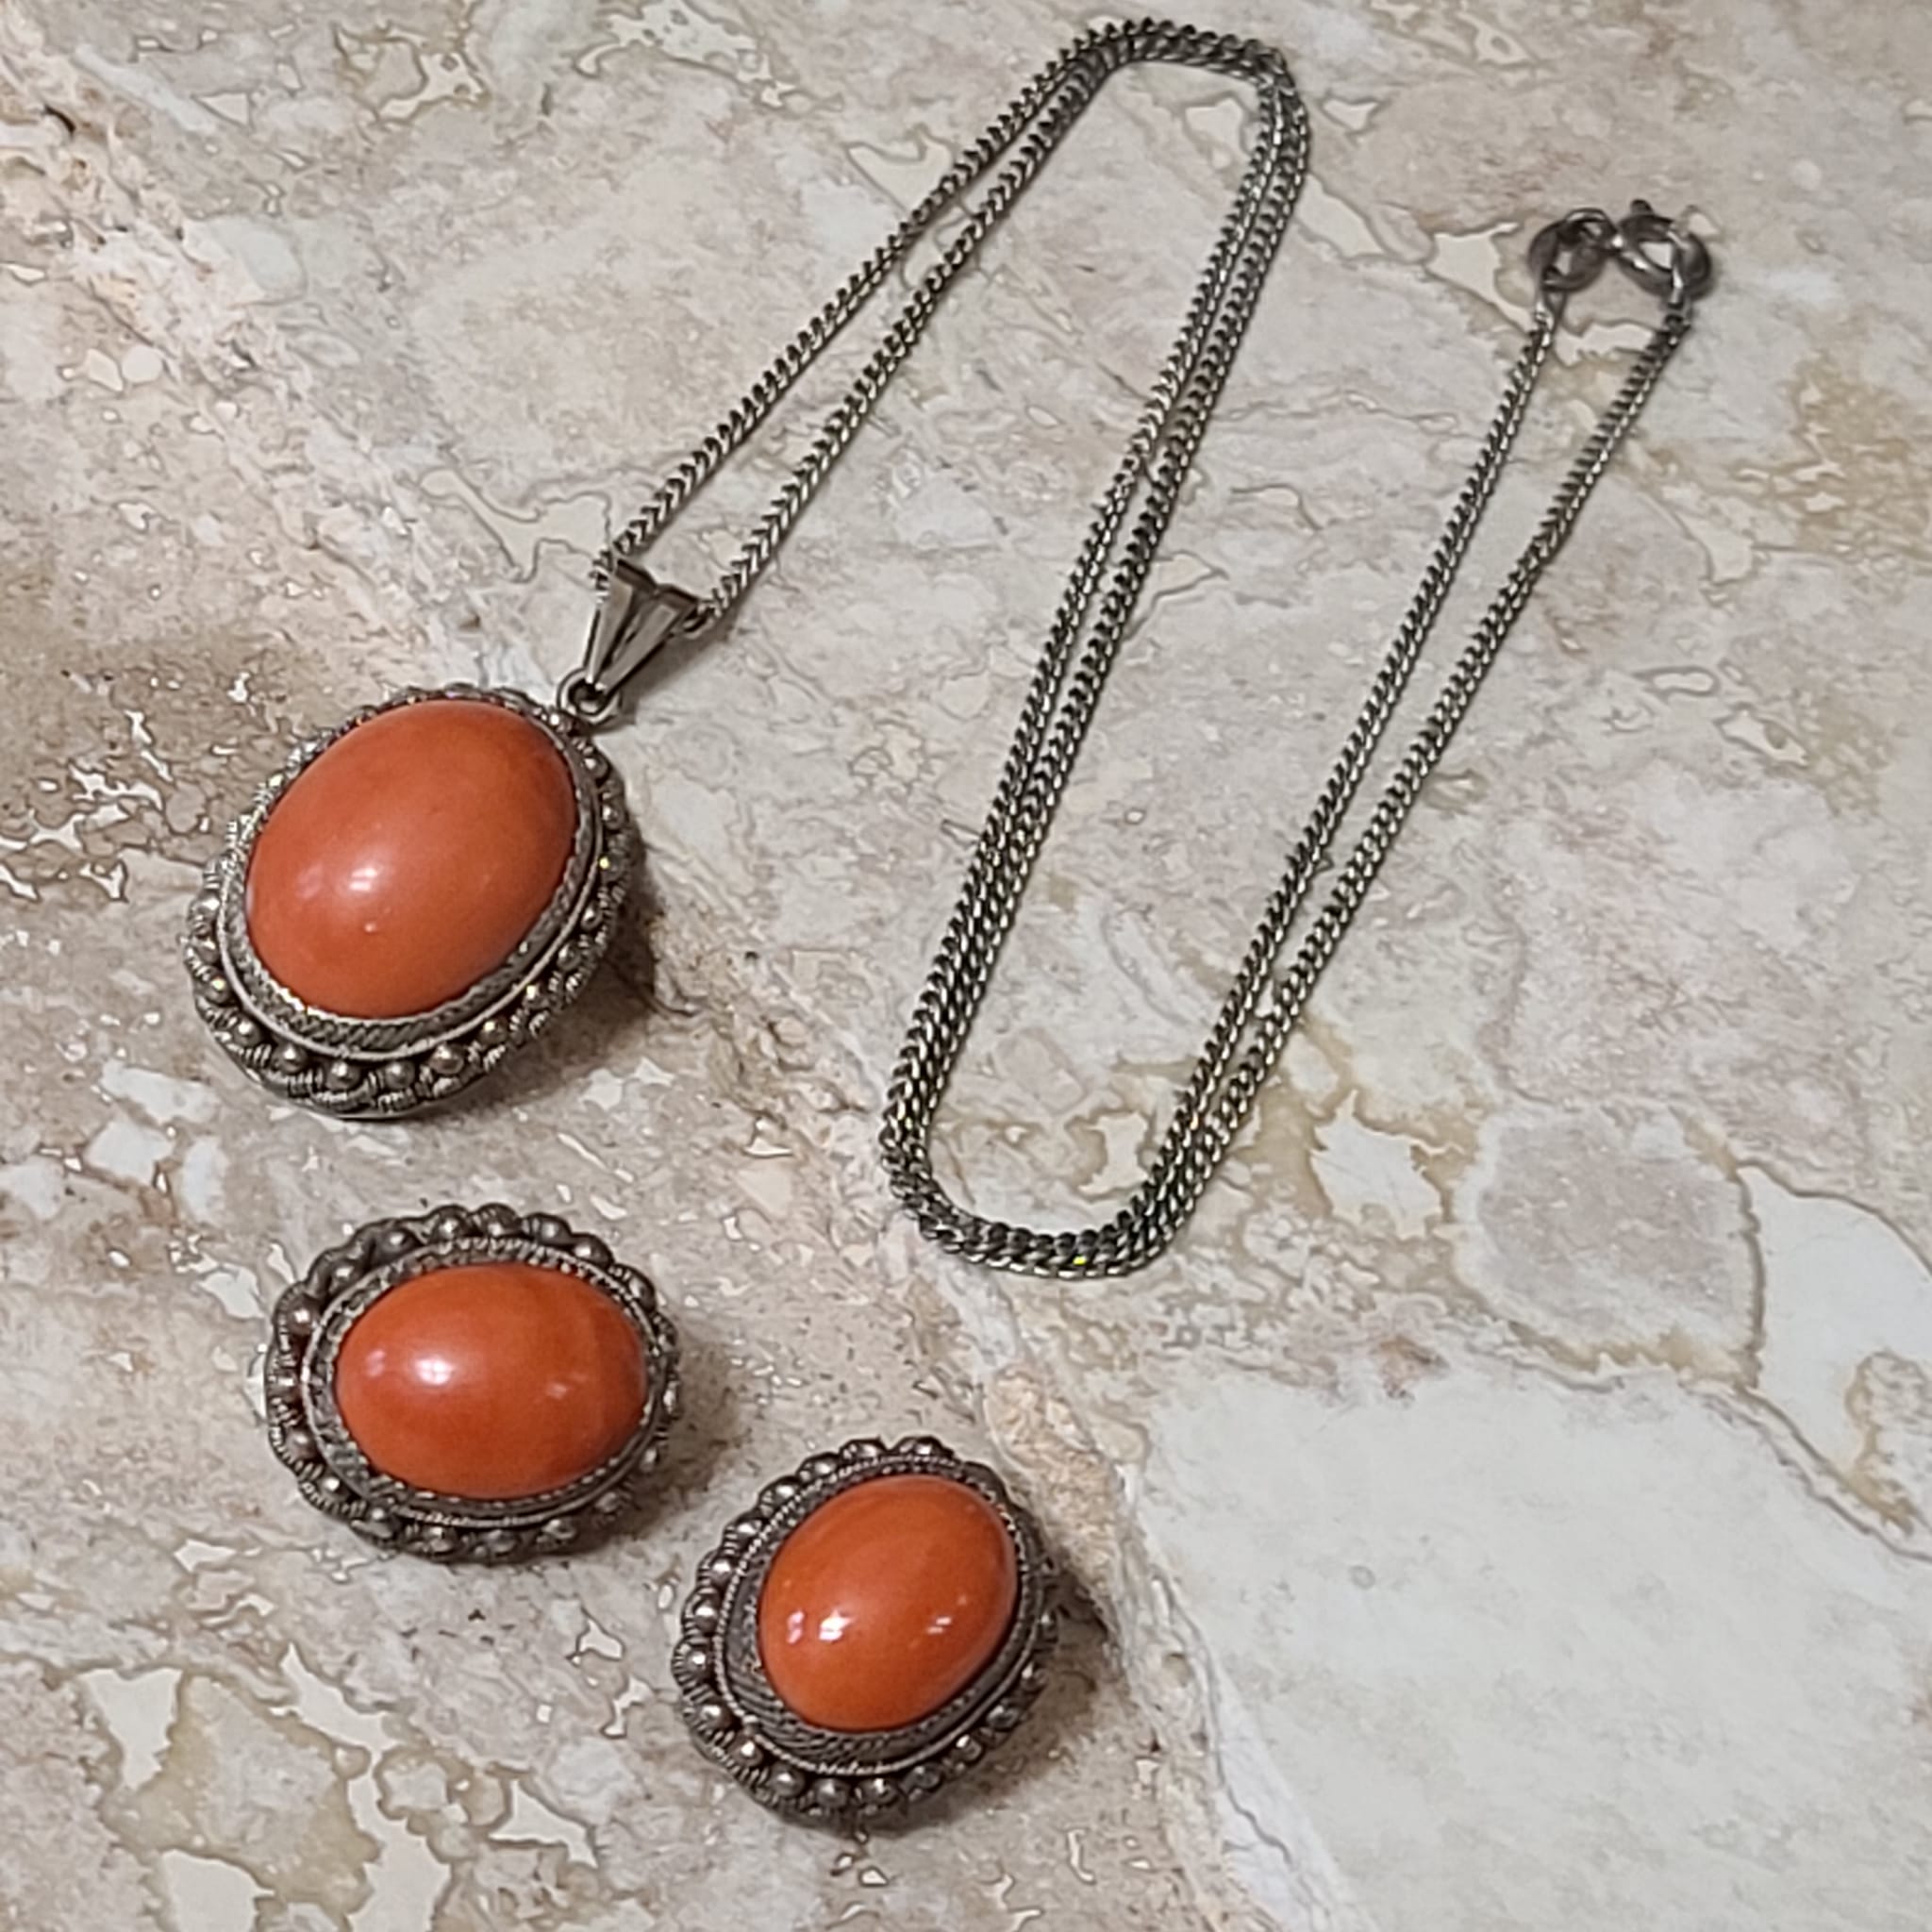 Coral and Sterling Silver Pendant Necklace & Earrings Set